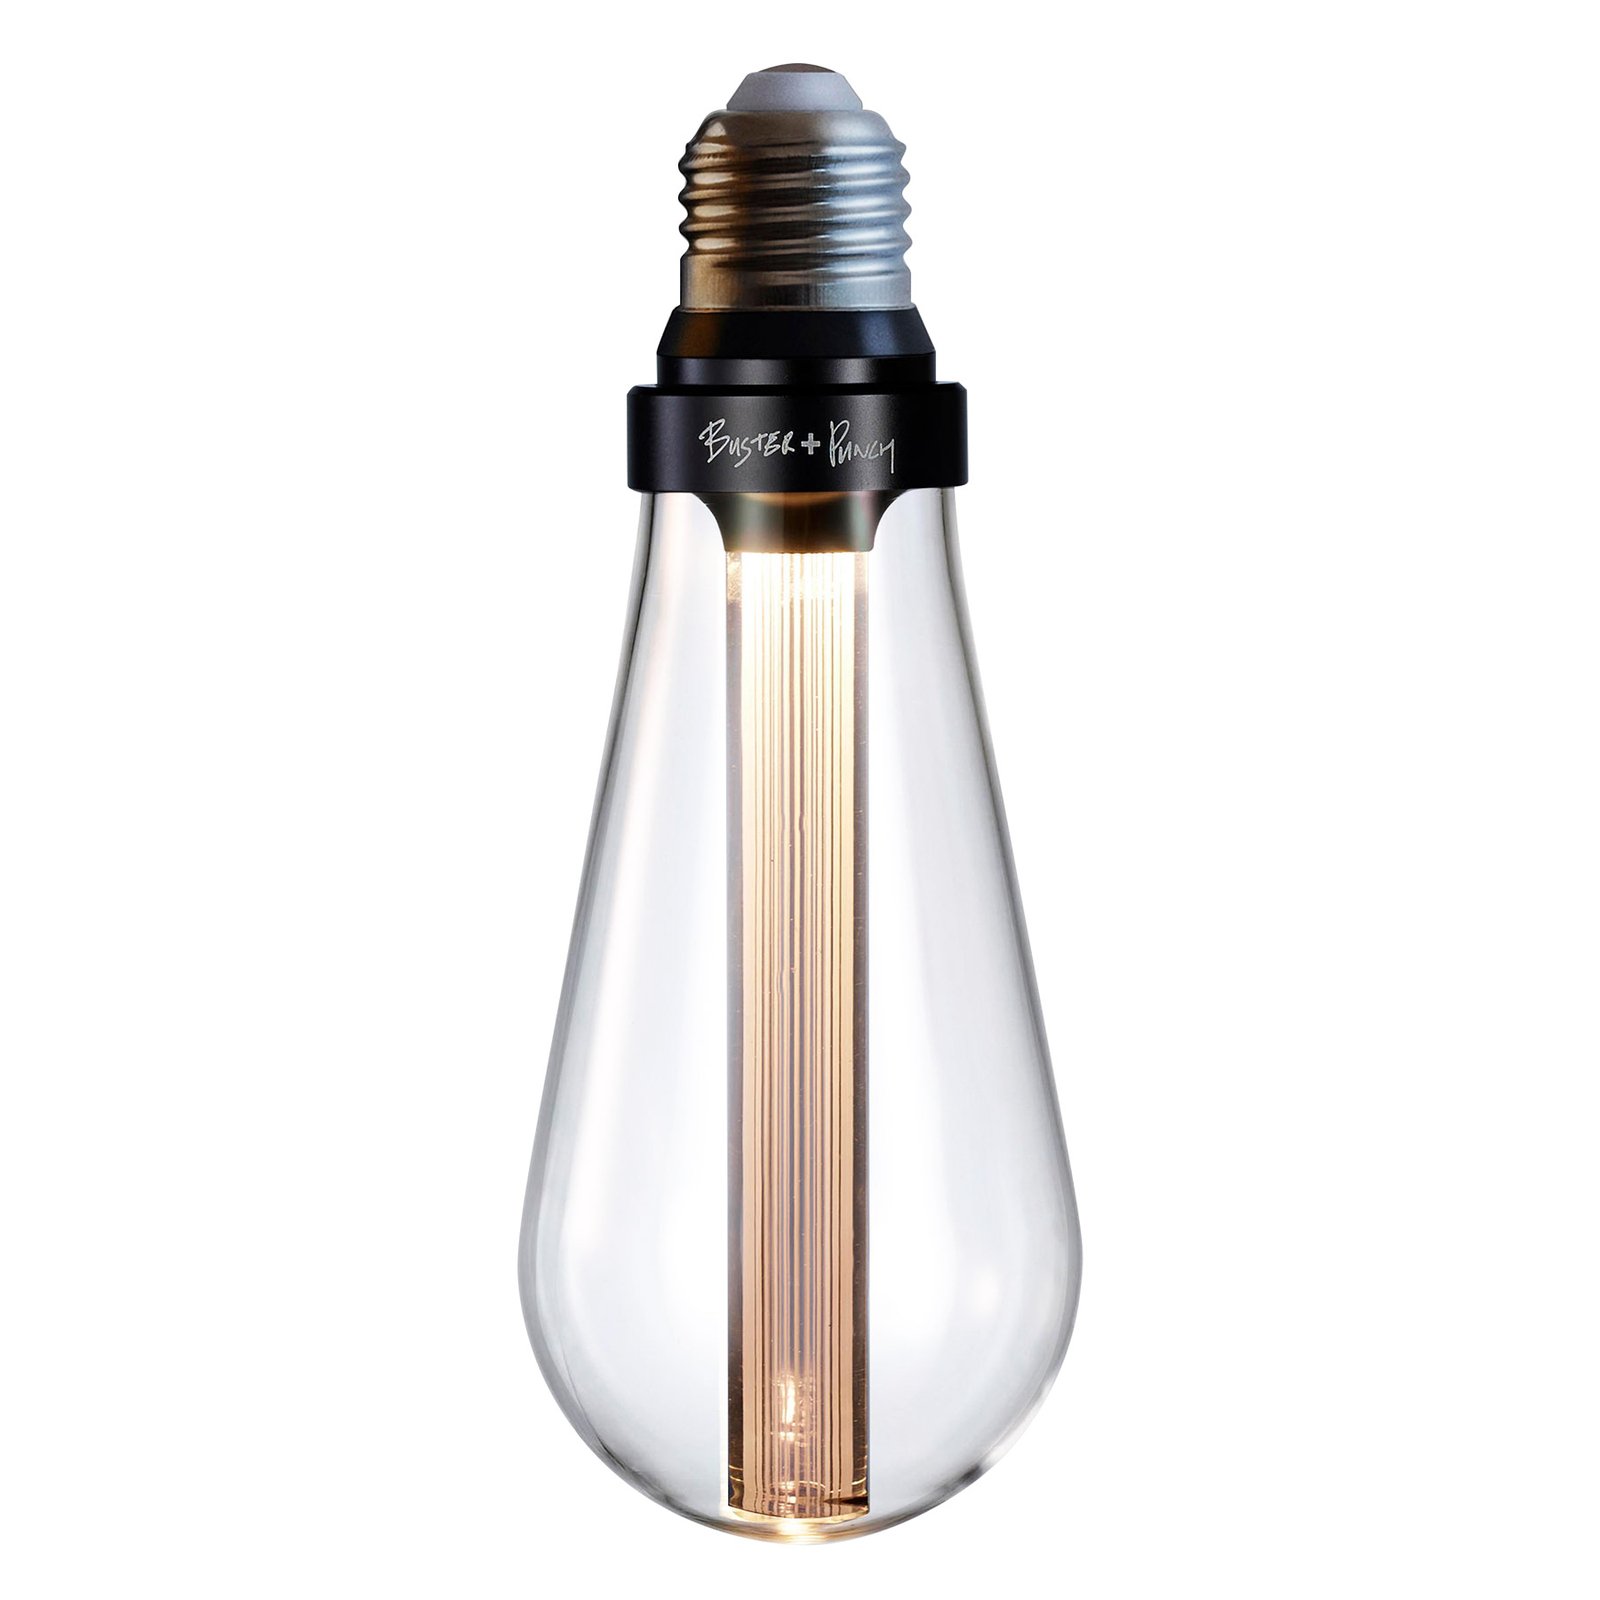 Buster + Punch LED bulb E27 2 W dimmable crystal